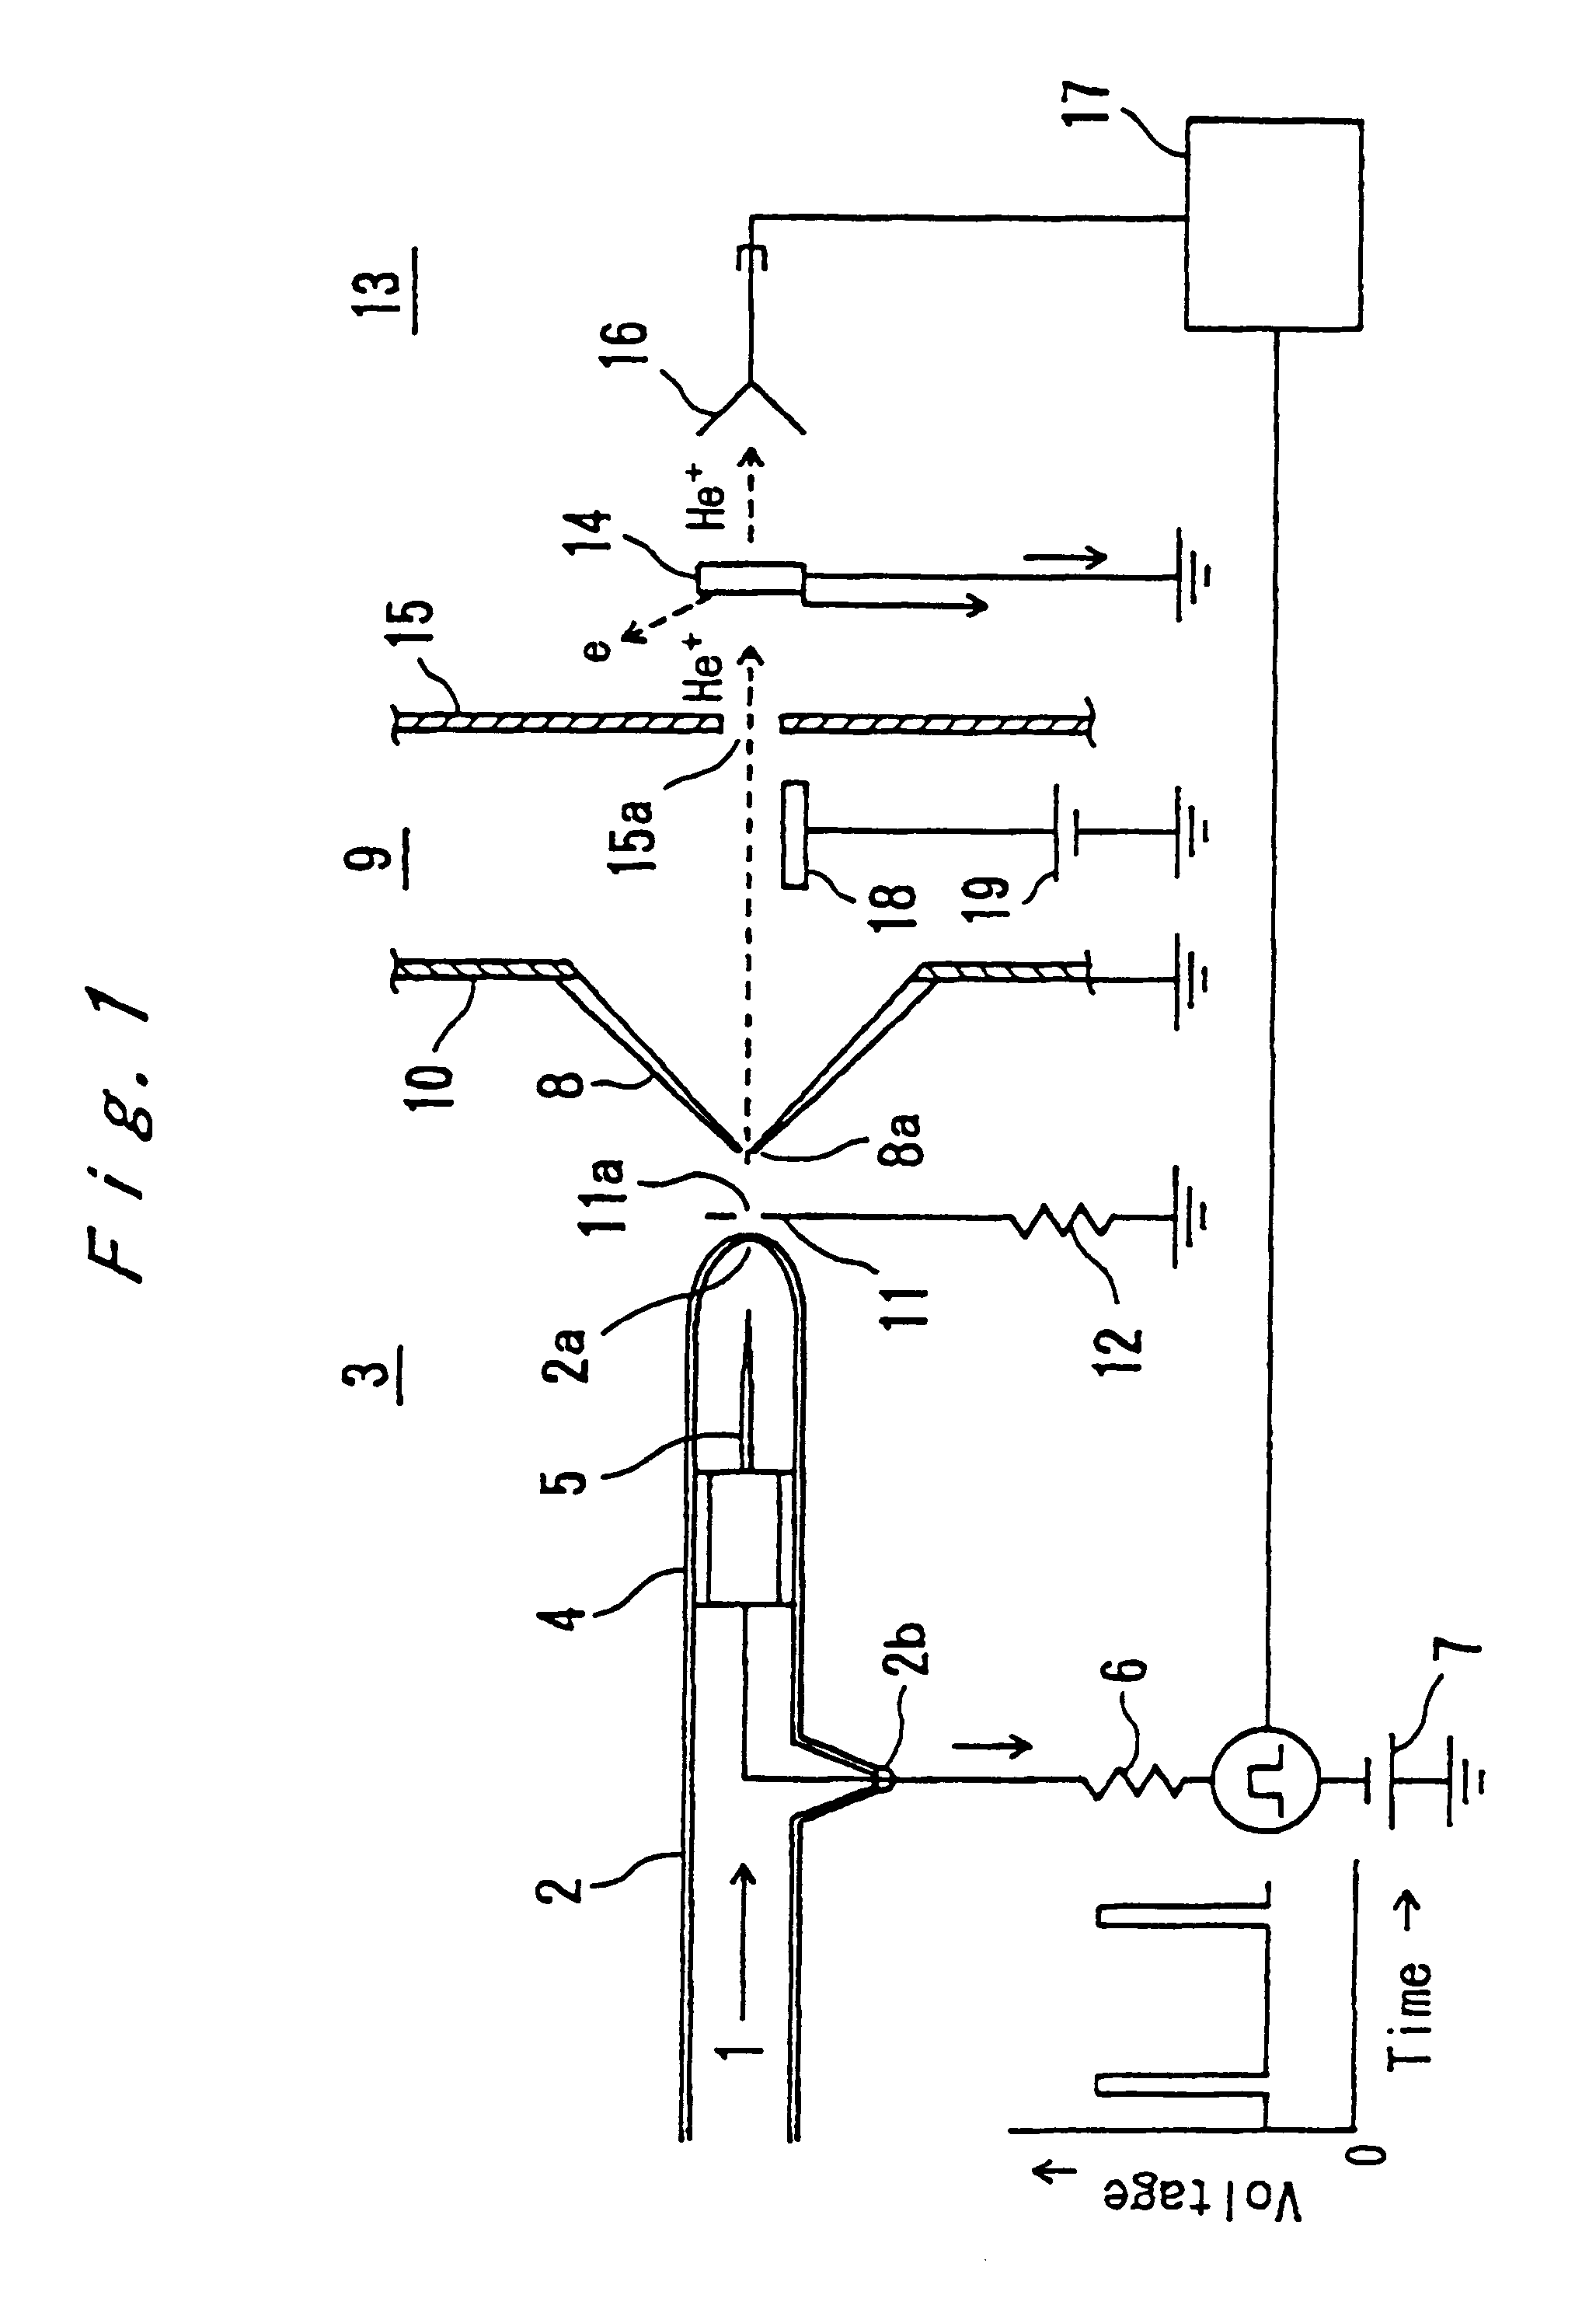 Method of generating a pulsed metastable atom beam and pulsed ultraviolet radiation and an apparatus therefor